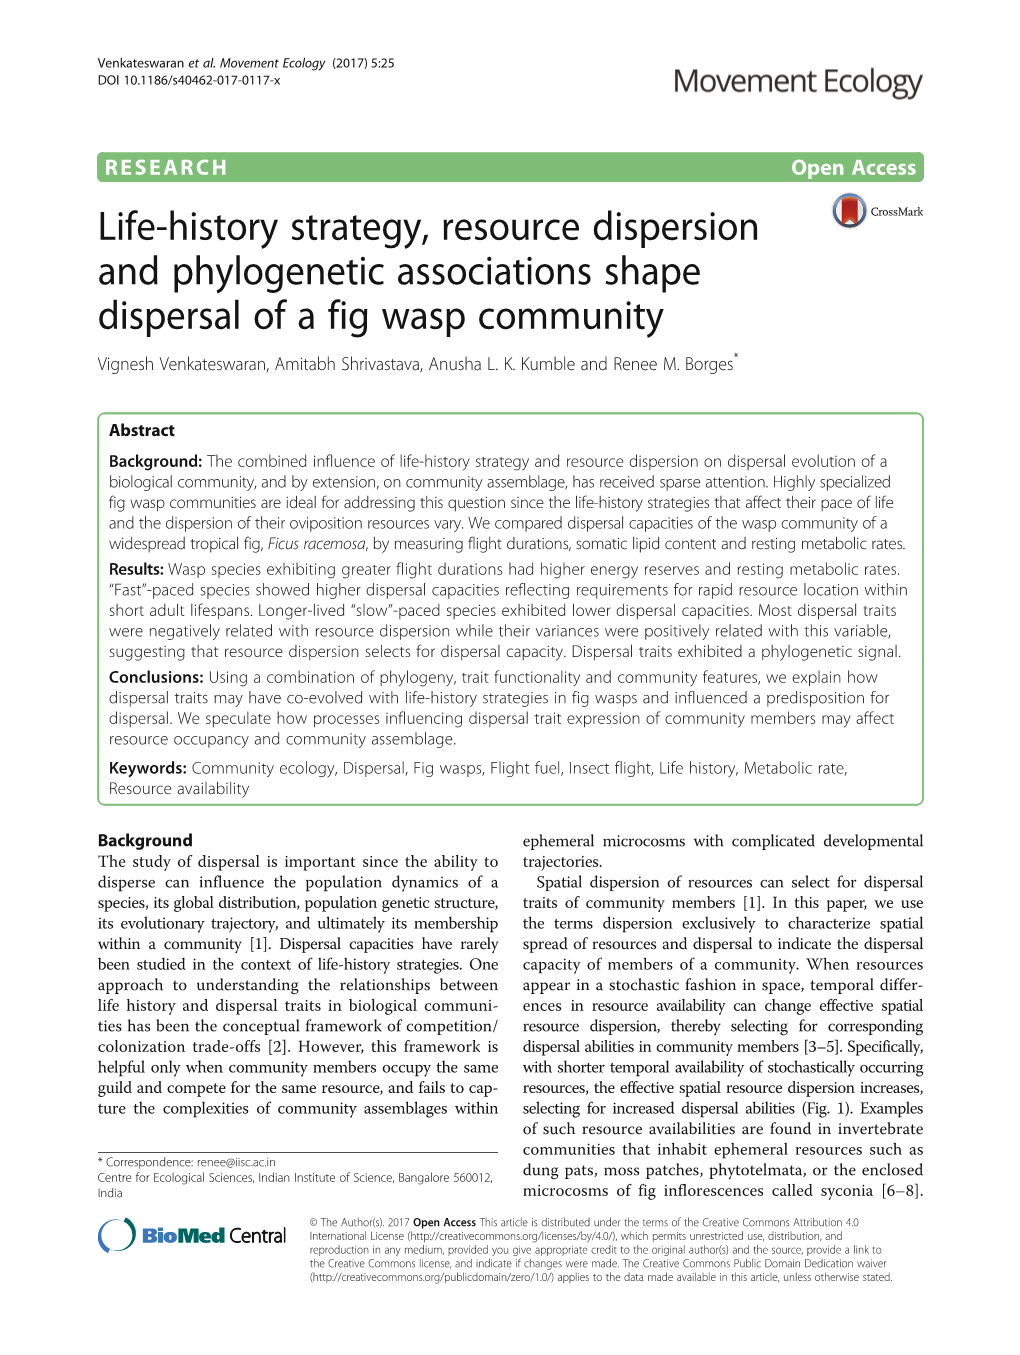 Viewed As Examples of Life-History Trait Syndromes As Crucially Important for Membership in Such Communities Associated with Dispersal [21, 22]